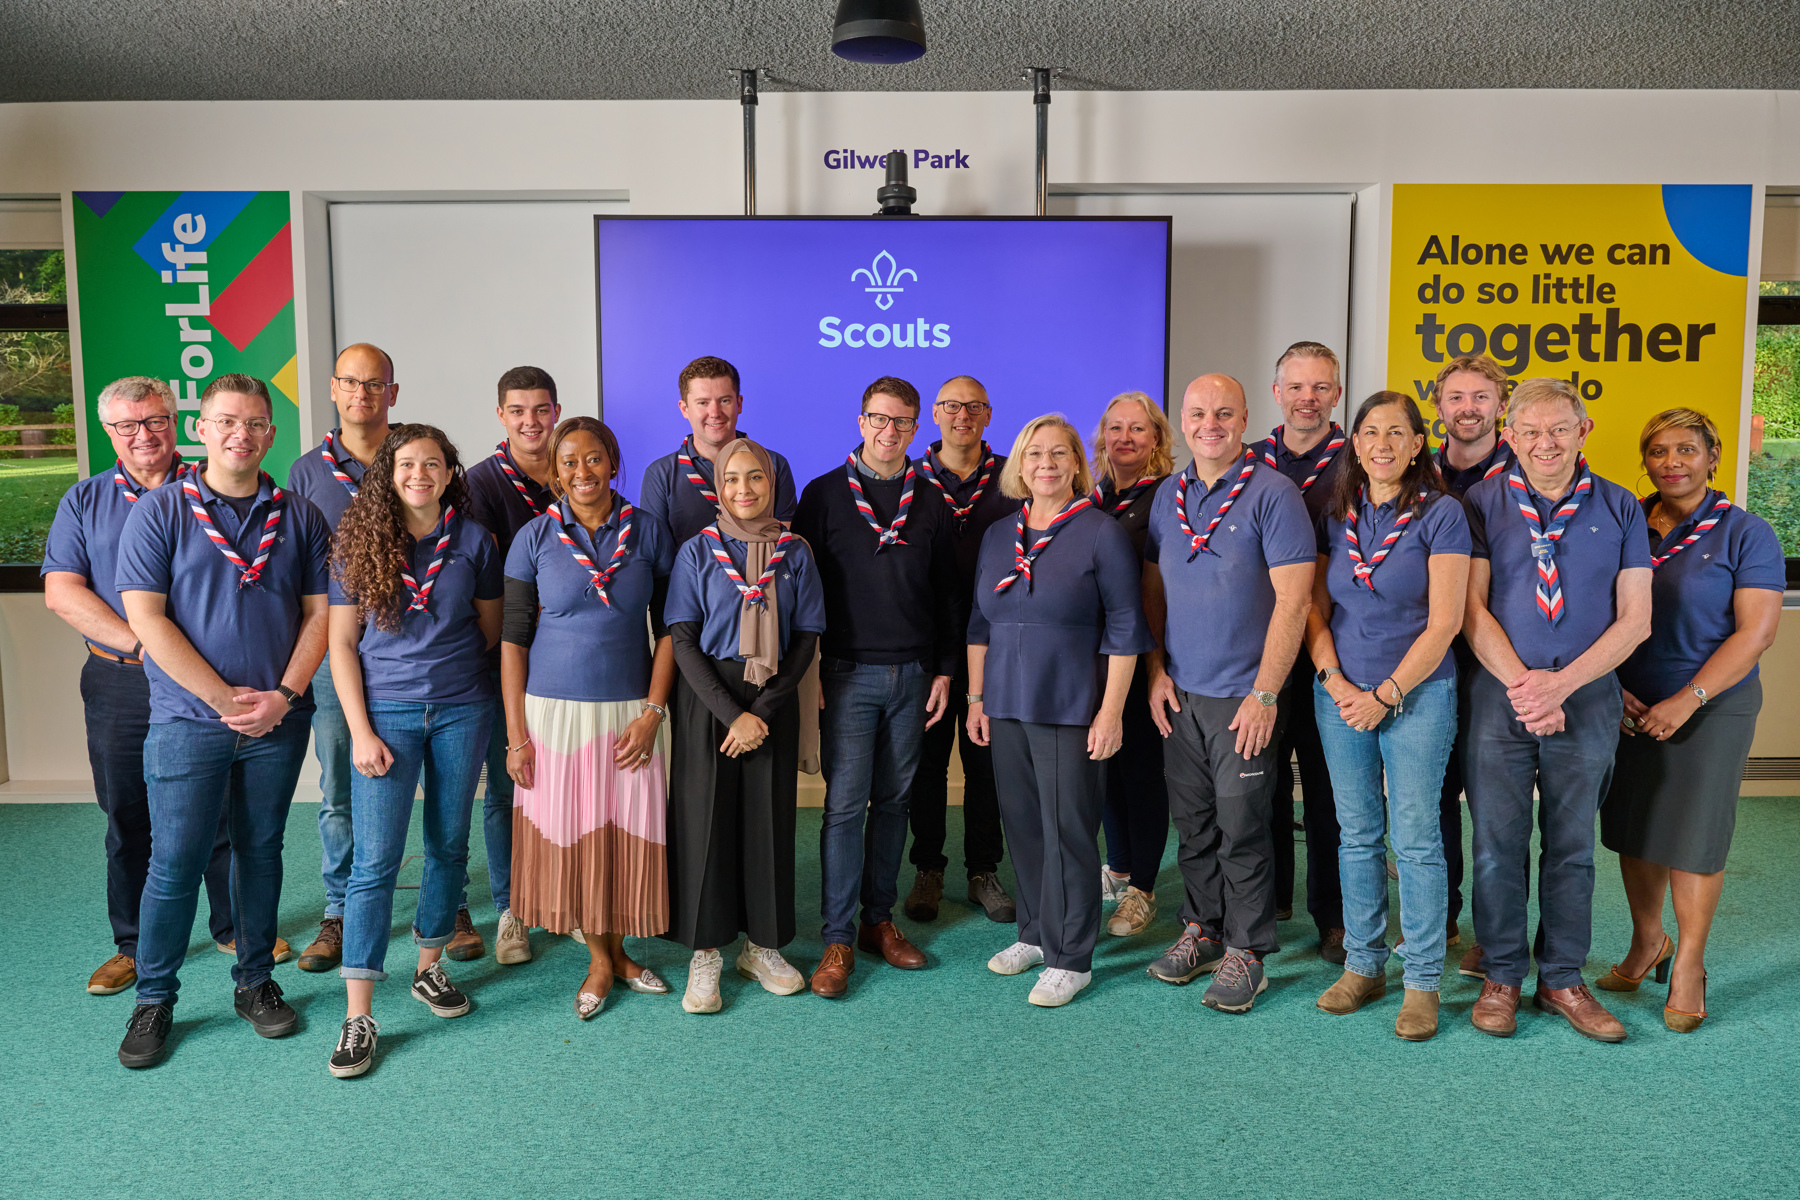 The Scouts Board of Trustees stand together in a line, all wearing navy polo shirts and red, white and blue neckers. They're smiling at the camera and standing in front of a TV screen showing the Scouts logo in white on a purple background.